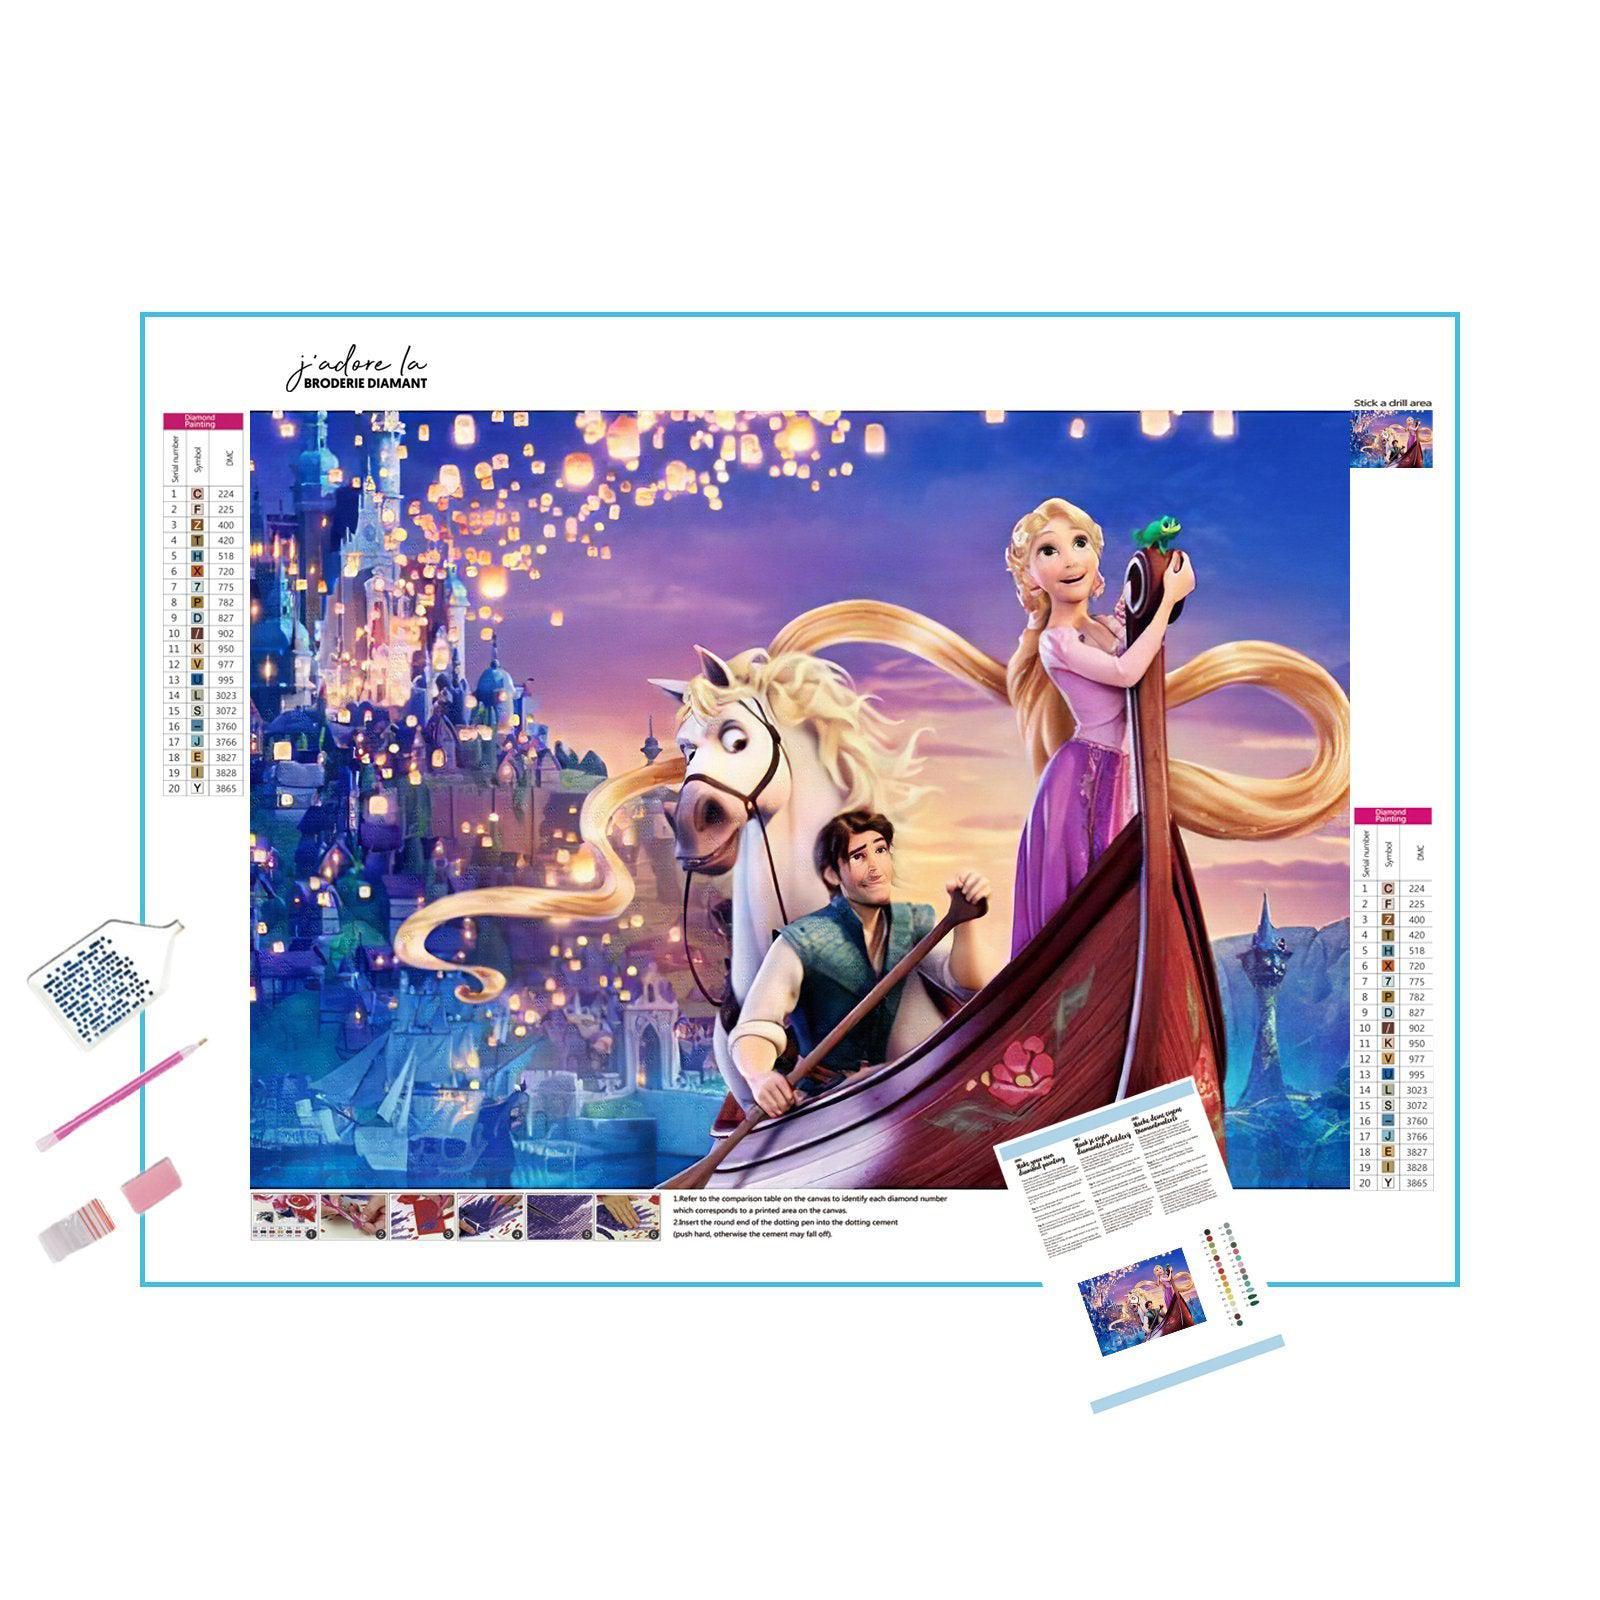 Relive a magical moment with Flynn and Rapunzel on a boat.Horse, Flynn And Rapunzel In Boat - Diamondartlove